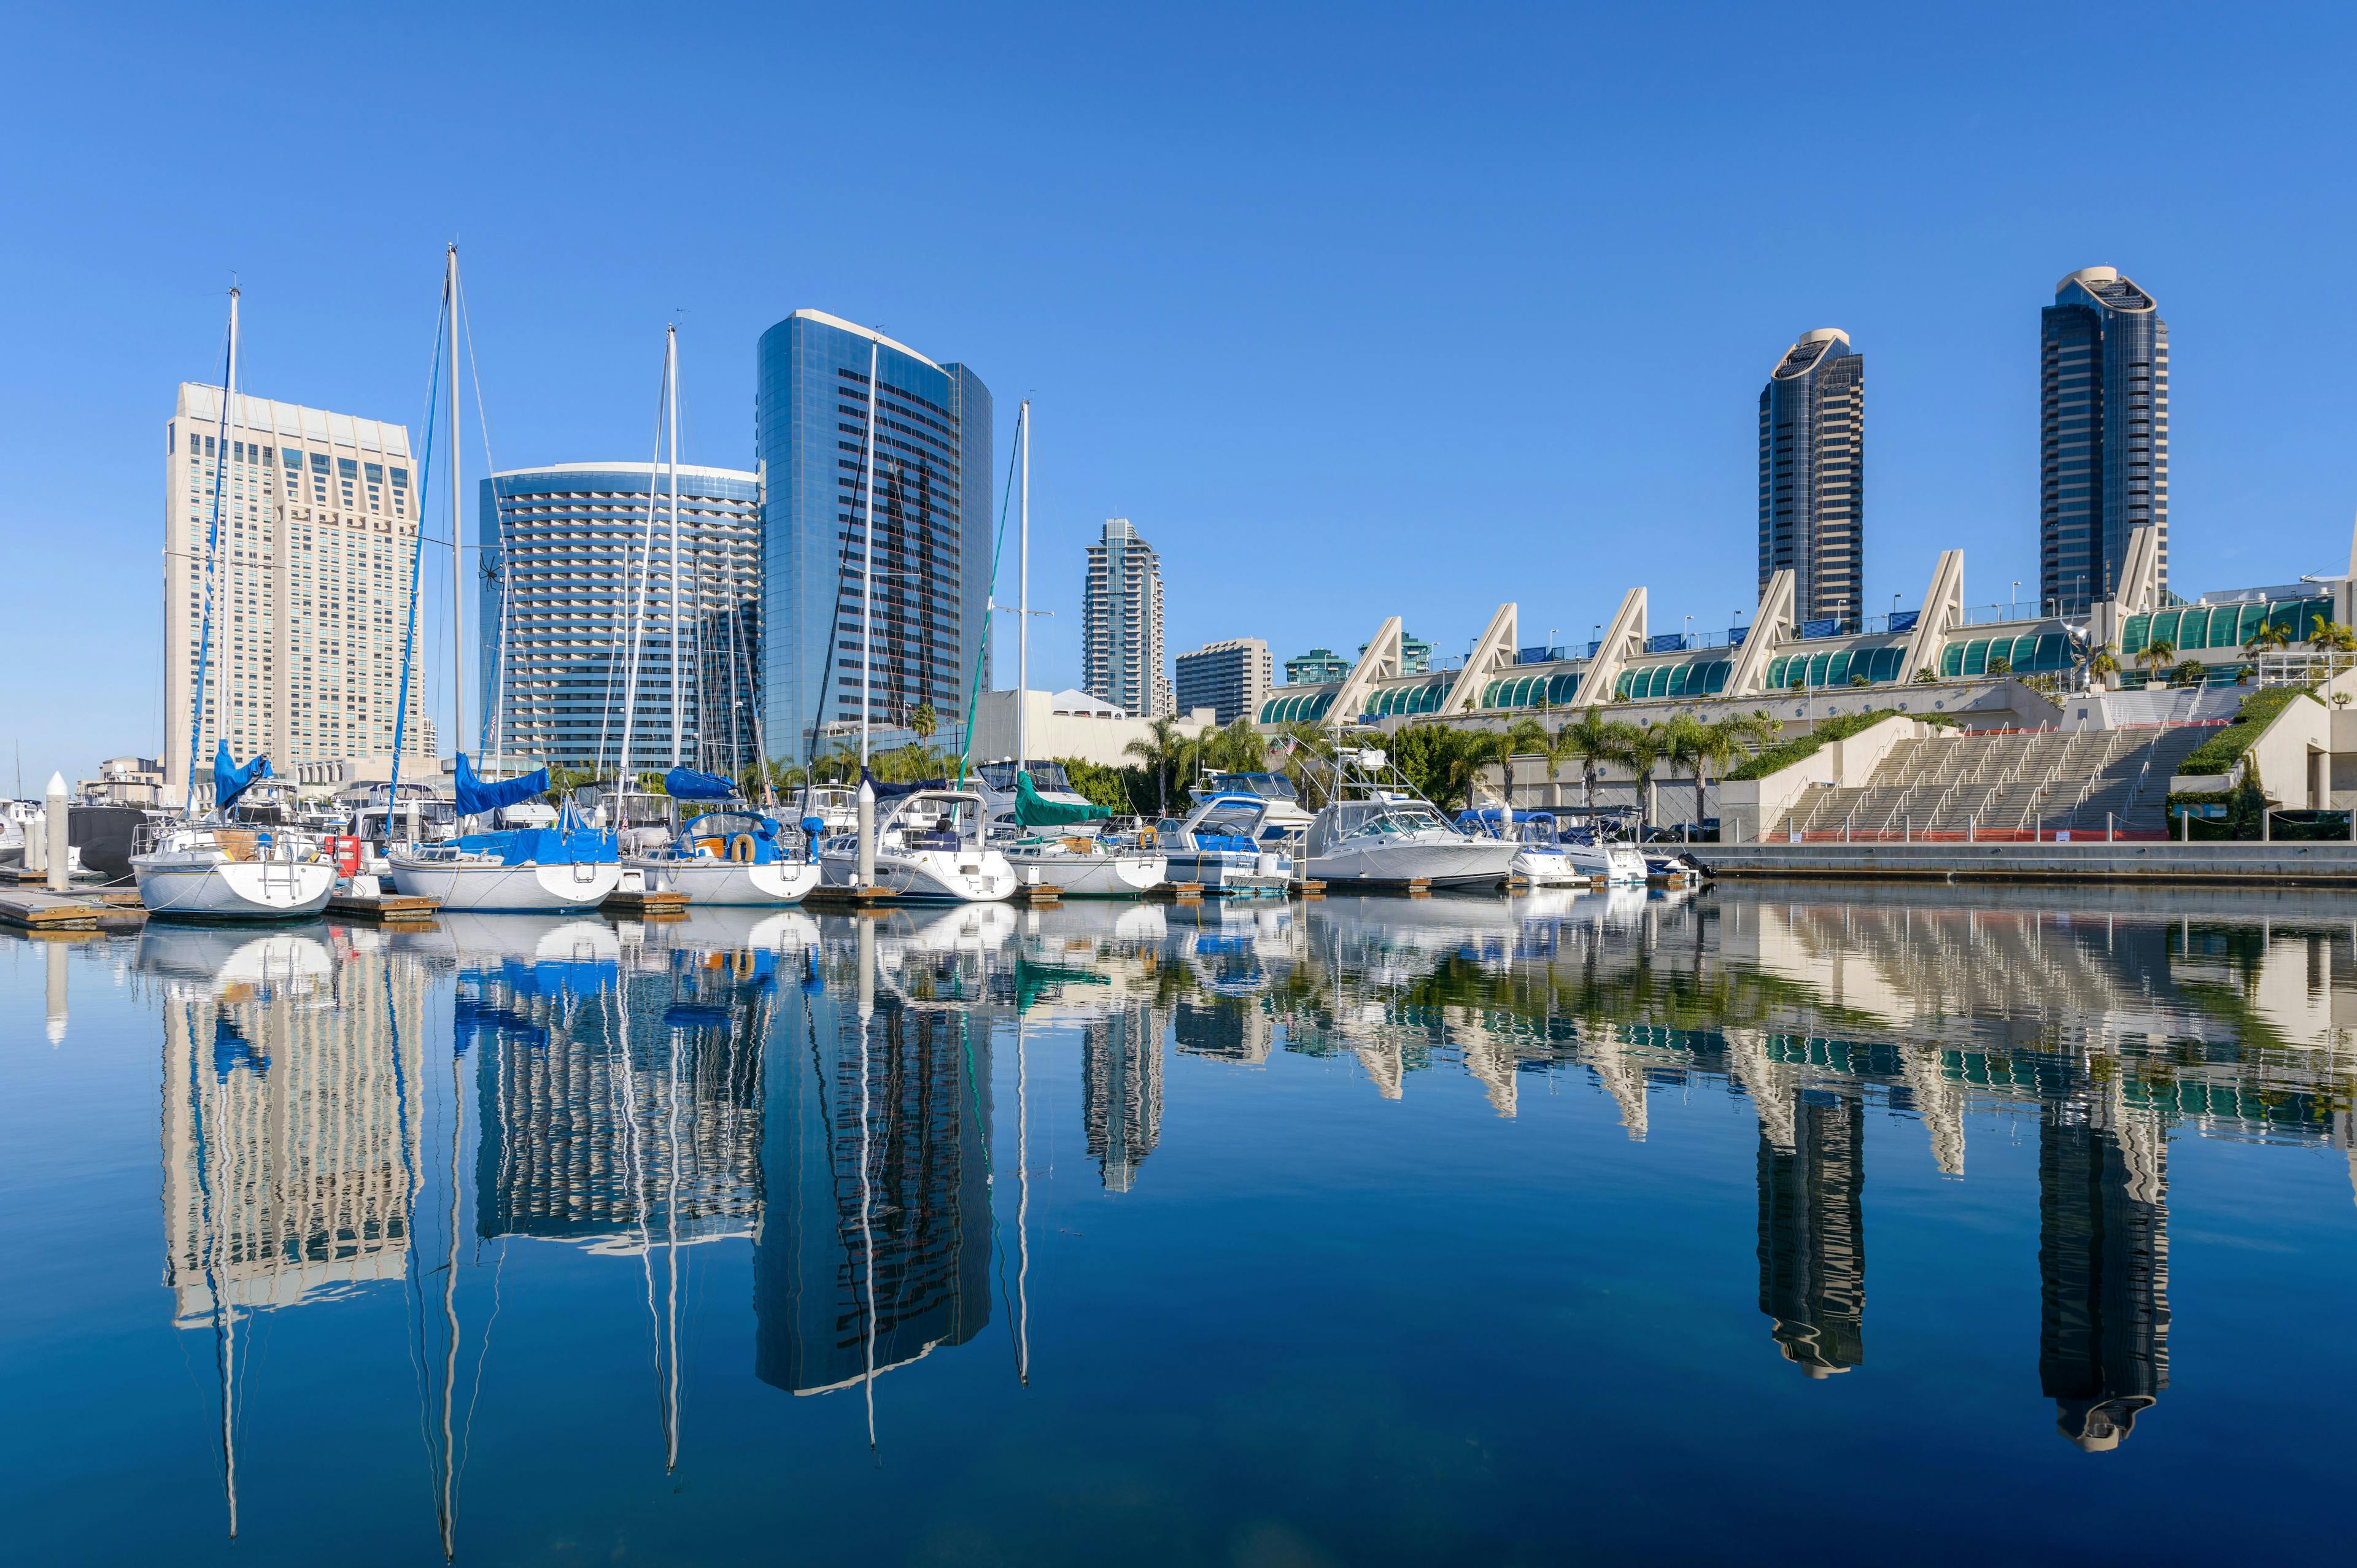 The American Society of Cataract and Refractive Surgery will host this year’s ASCRS and ASOA Annual Meeting in San Diego, California, beginning on Friday. (Image courtesy of Adobe Stock/Sean Xu)